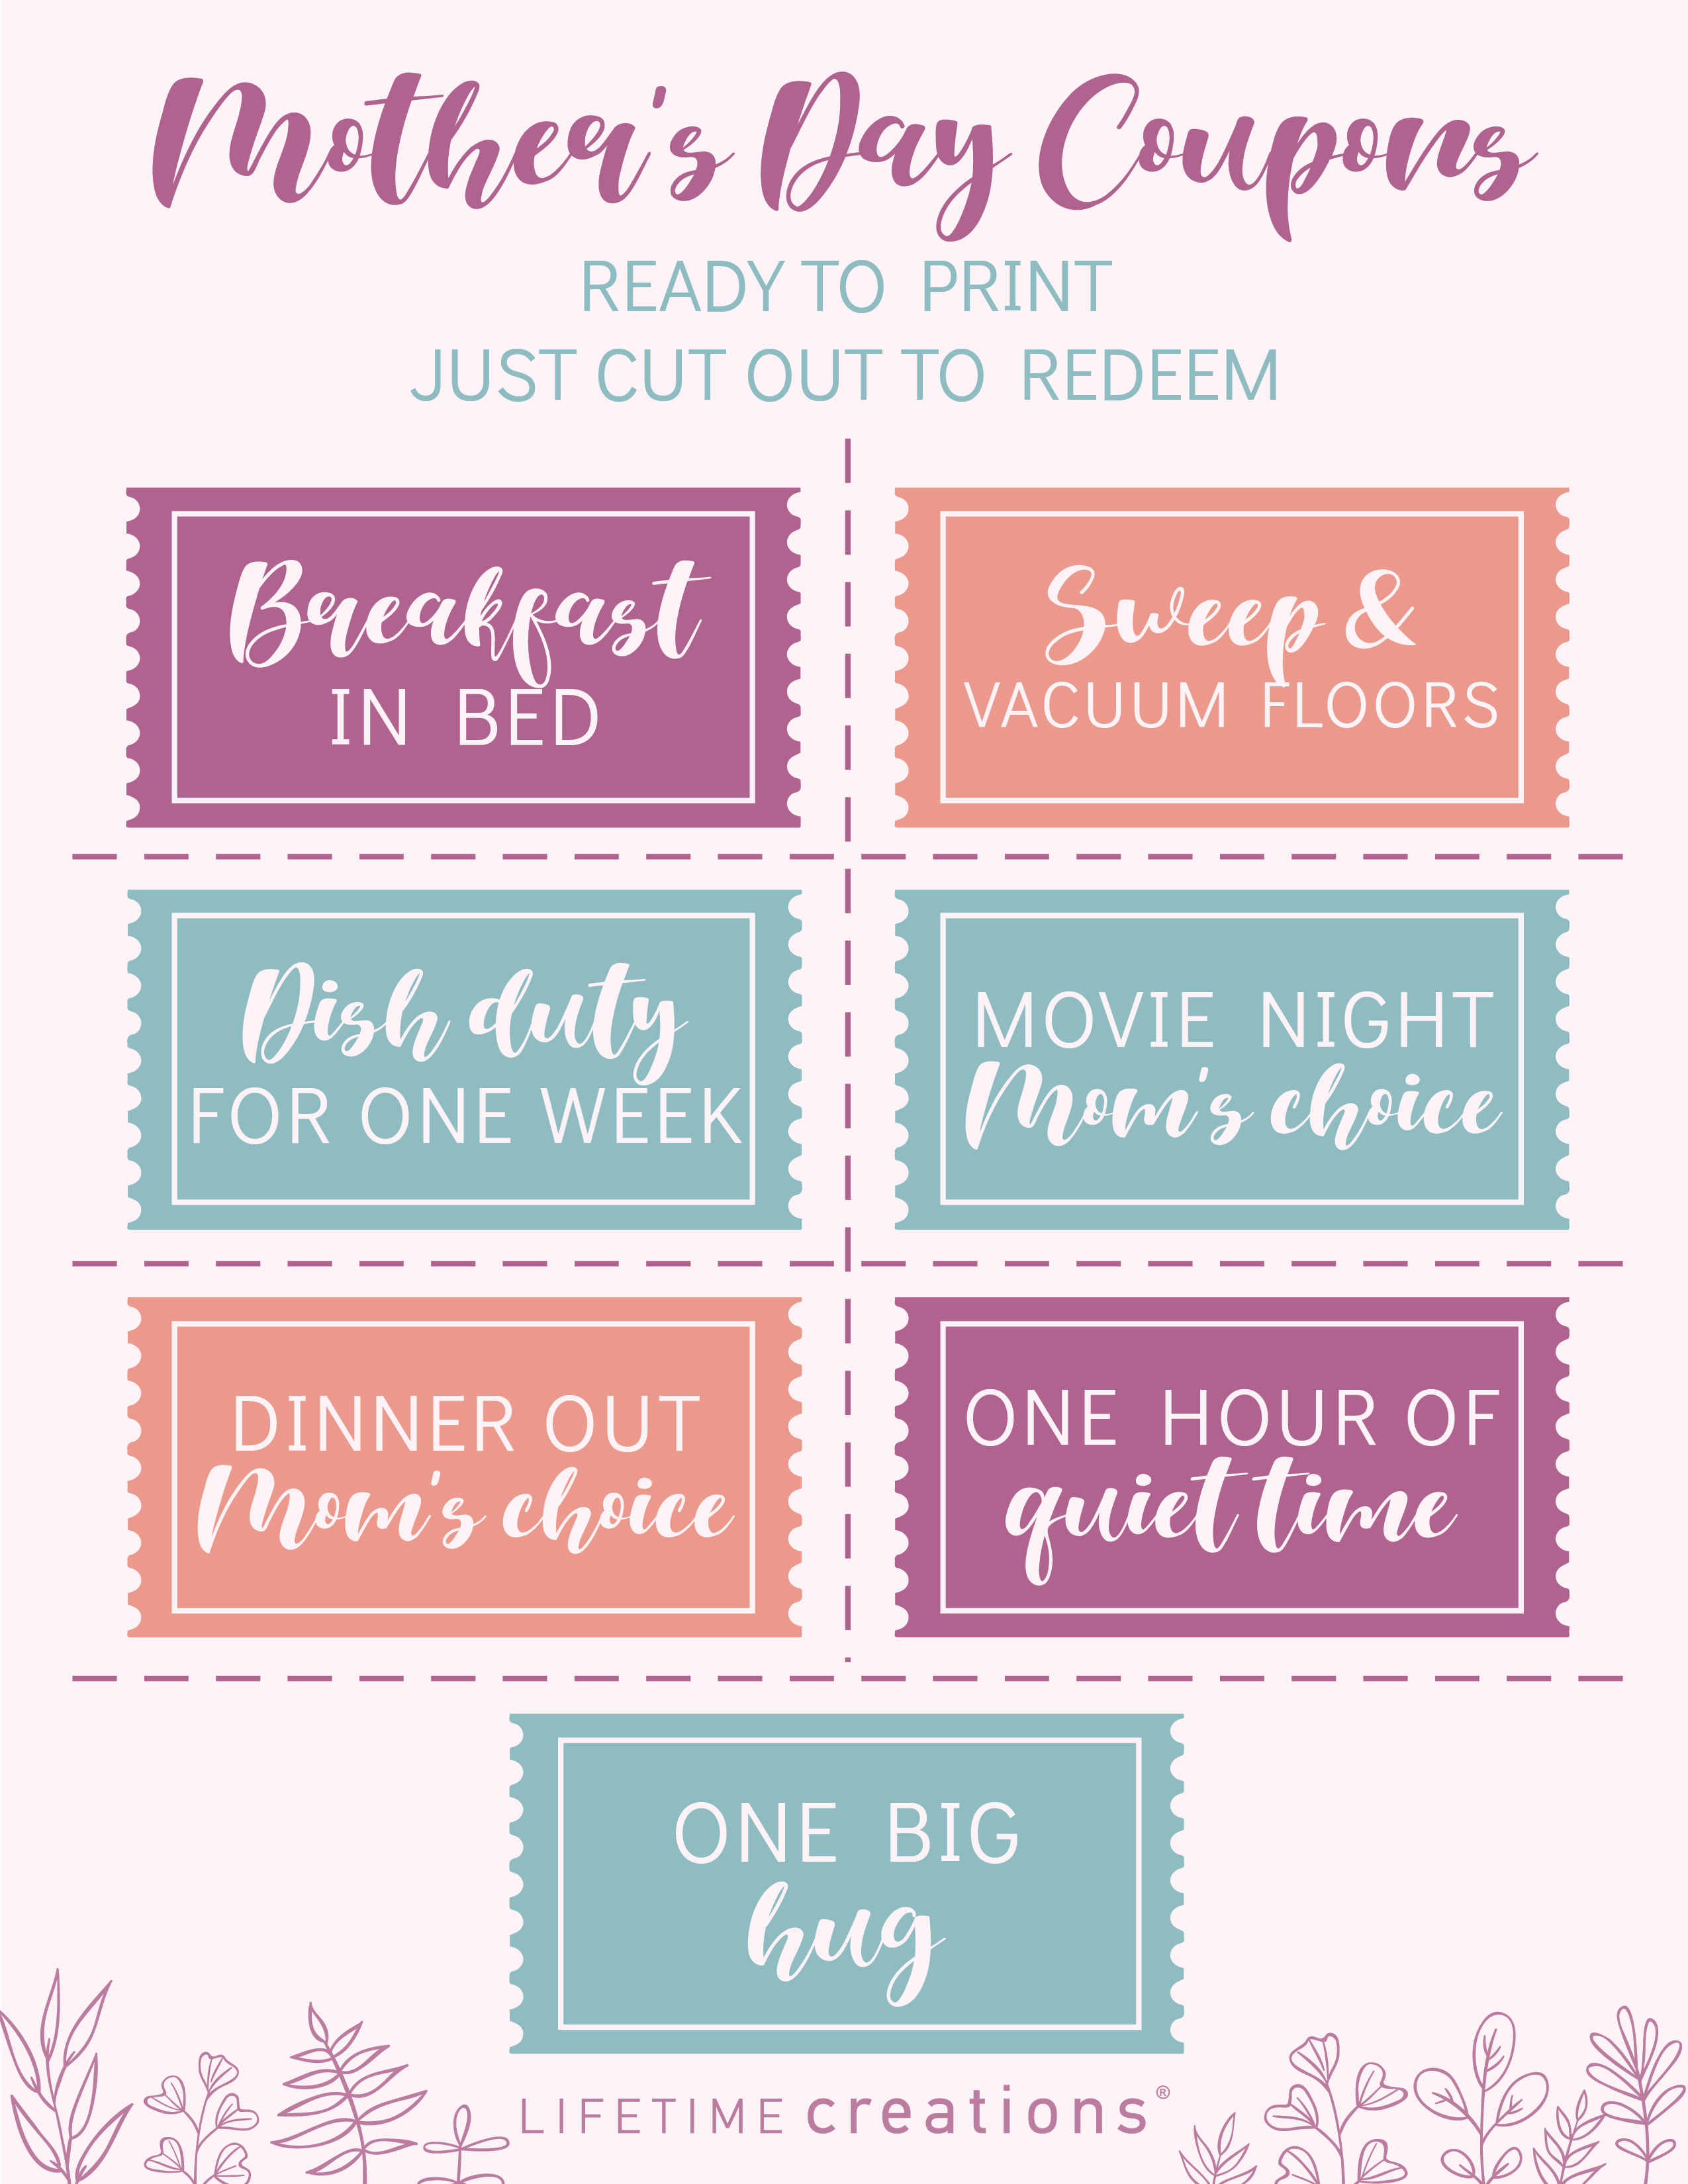 free-printable-mother-s-day-coupons-questionnaire-lifetime-creations